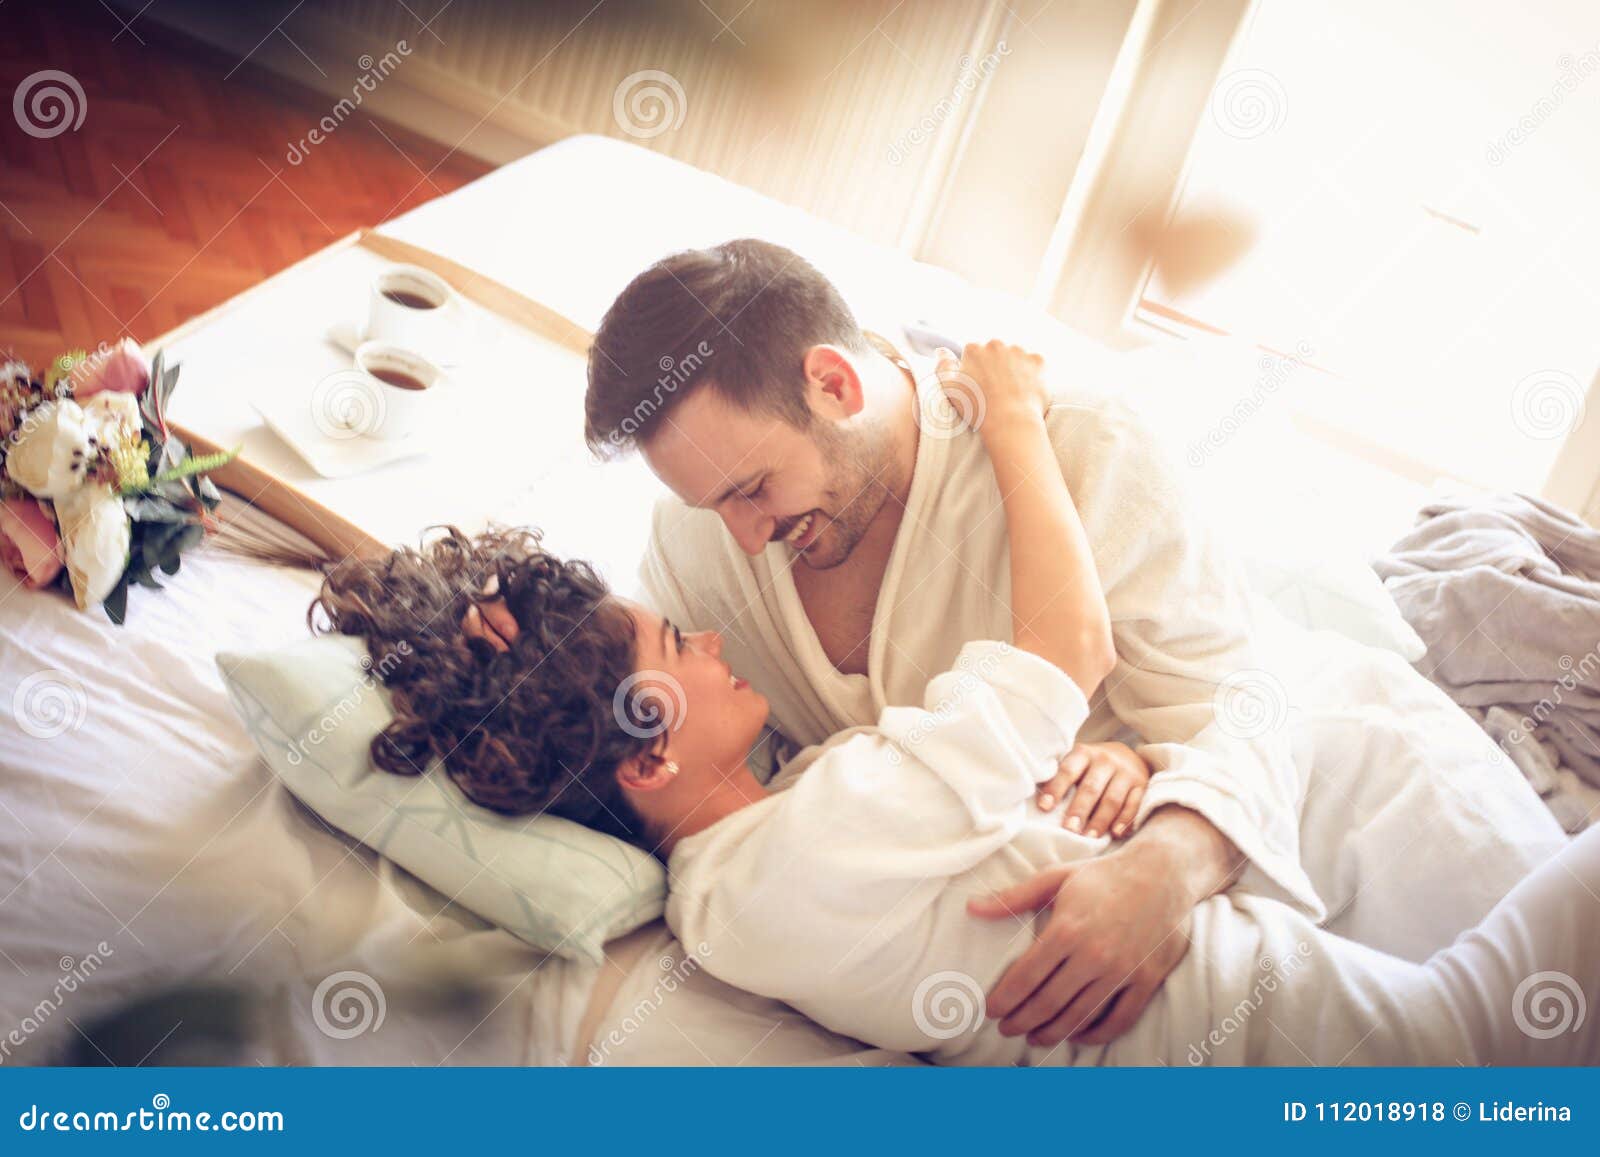 Good Morning. Happy Couple in Bed. Stock Photo - Image of hands ...